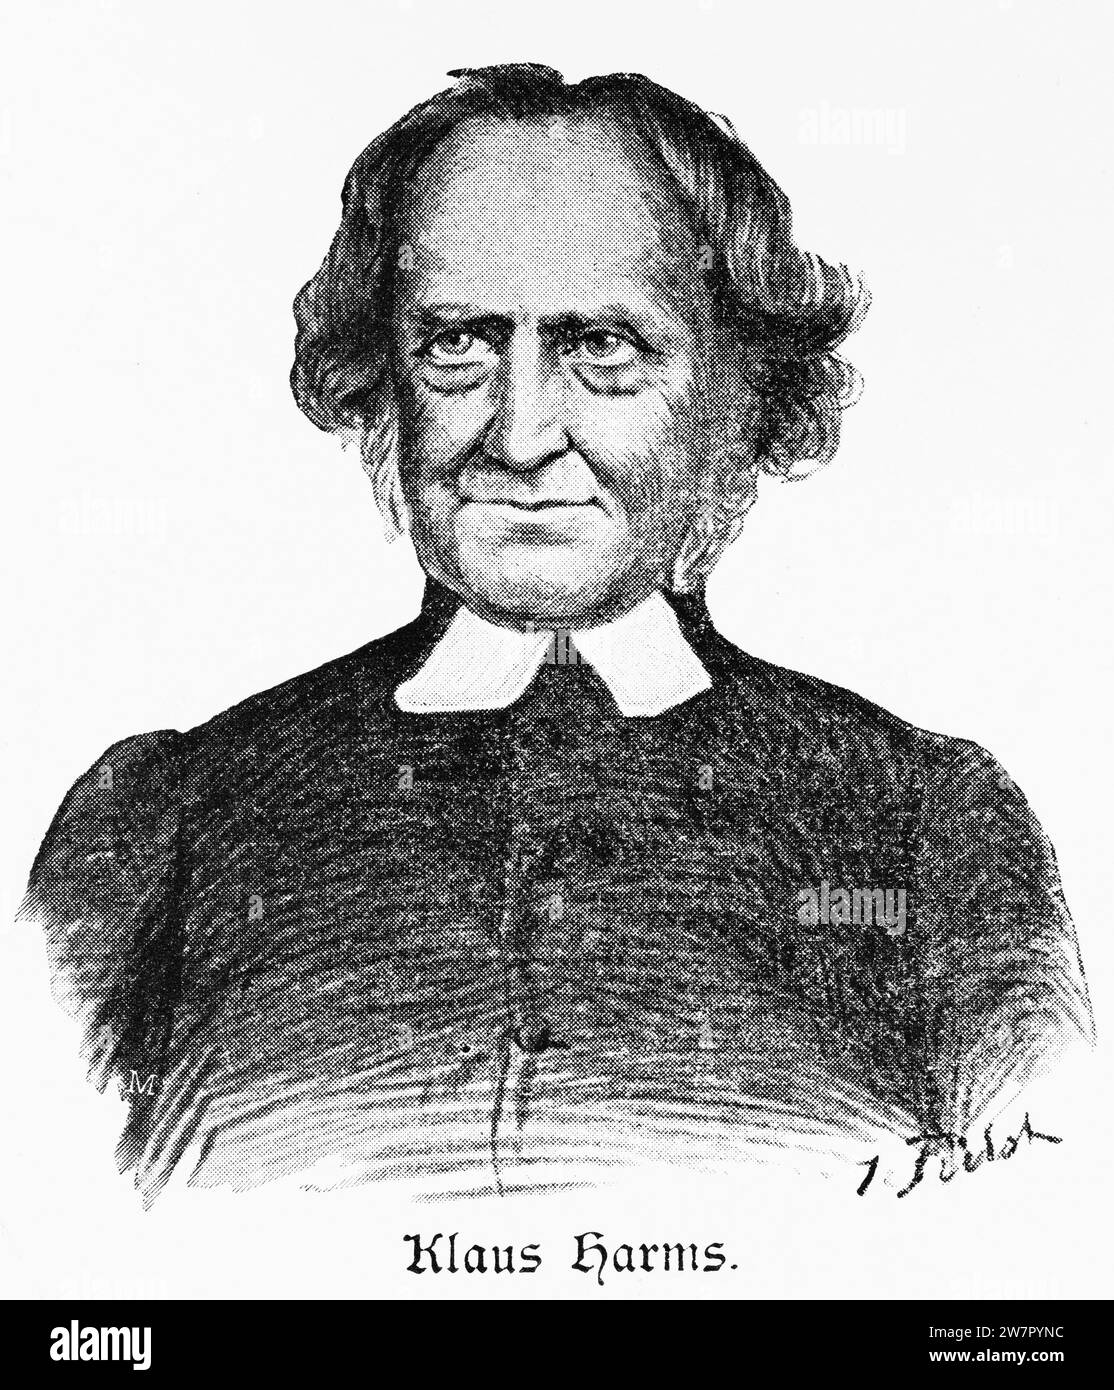 Theologian Klaus Harms, lived 1778-1855, Dithmarschen, Schleswig-Holstein, Northern Germany, Central Europe, histrorical Illustration 1896 Stock Photo